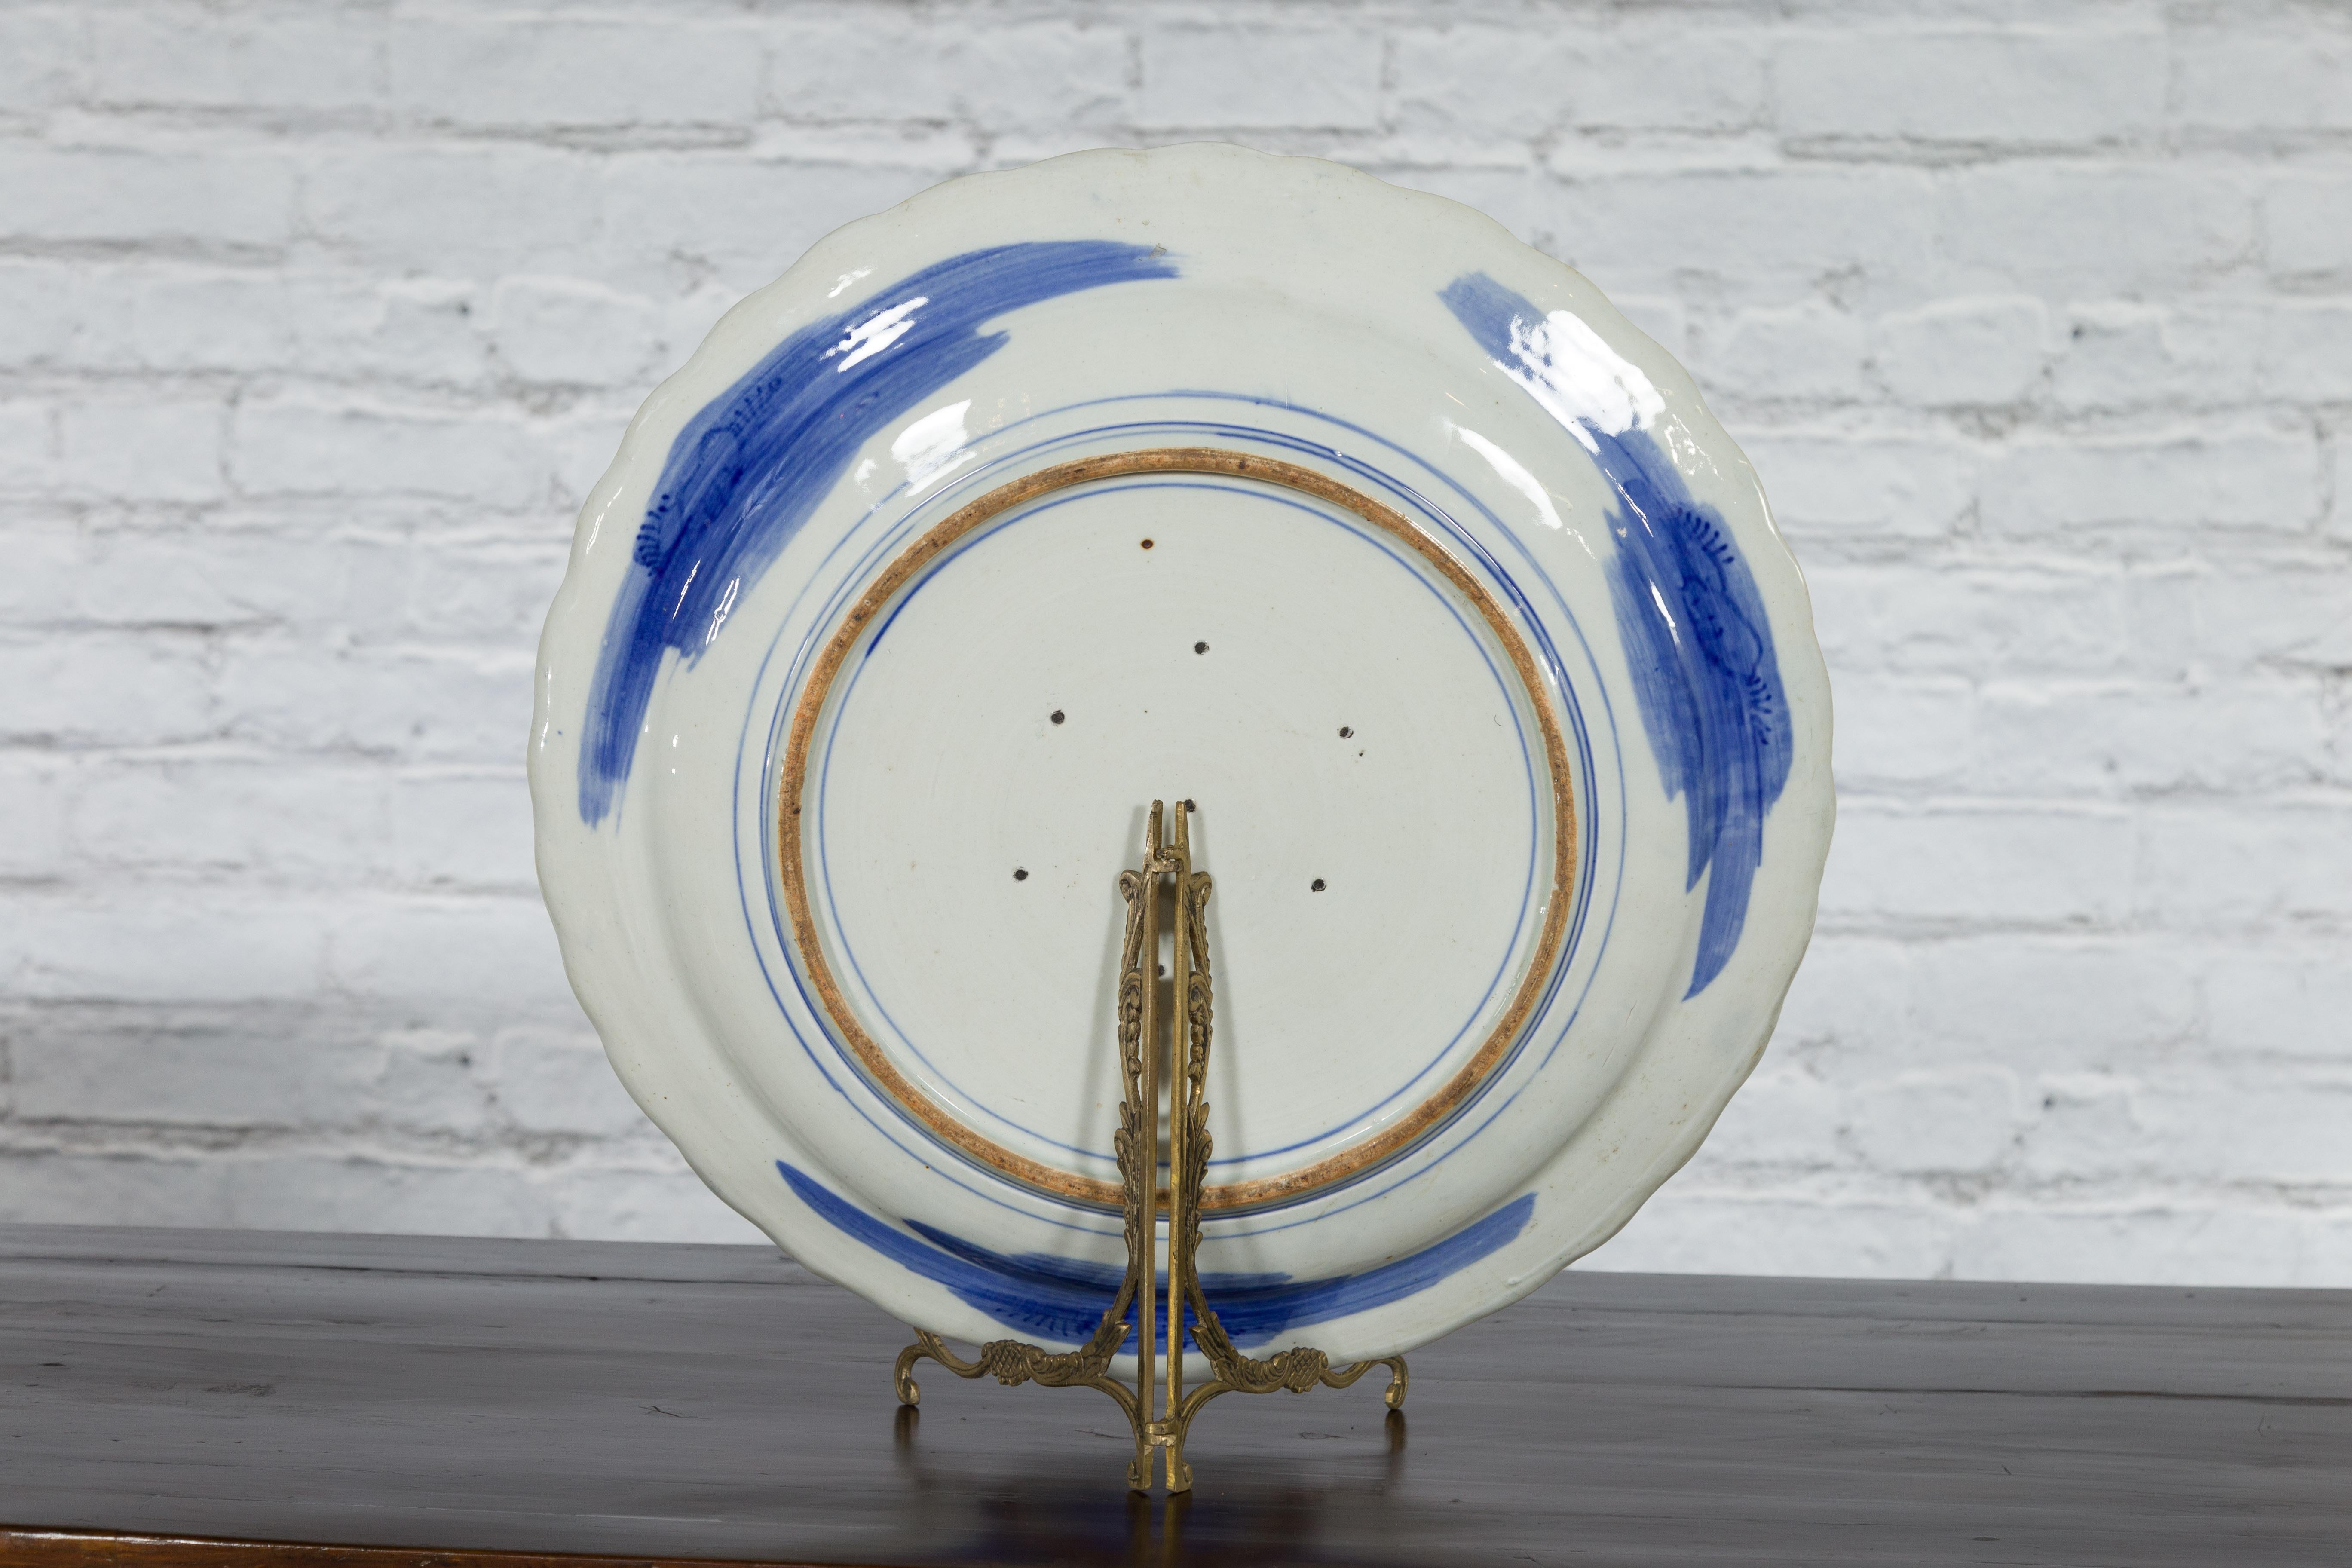 Japanese Blue and White Hand-Painted Porcelain Charger Plate with Foliage Décor For Sale 2